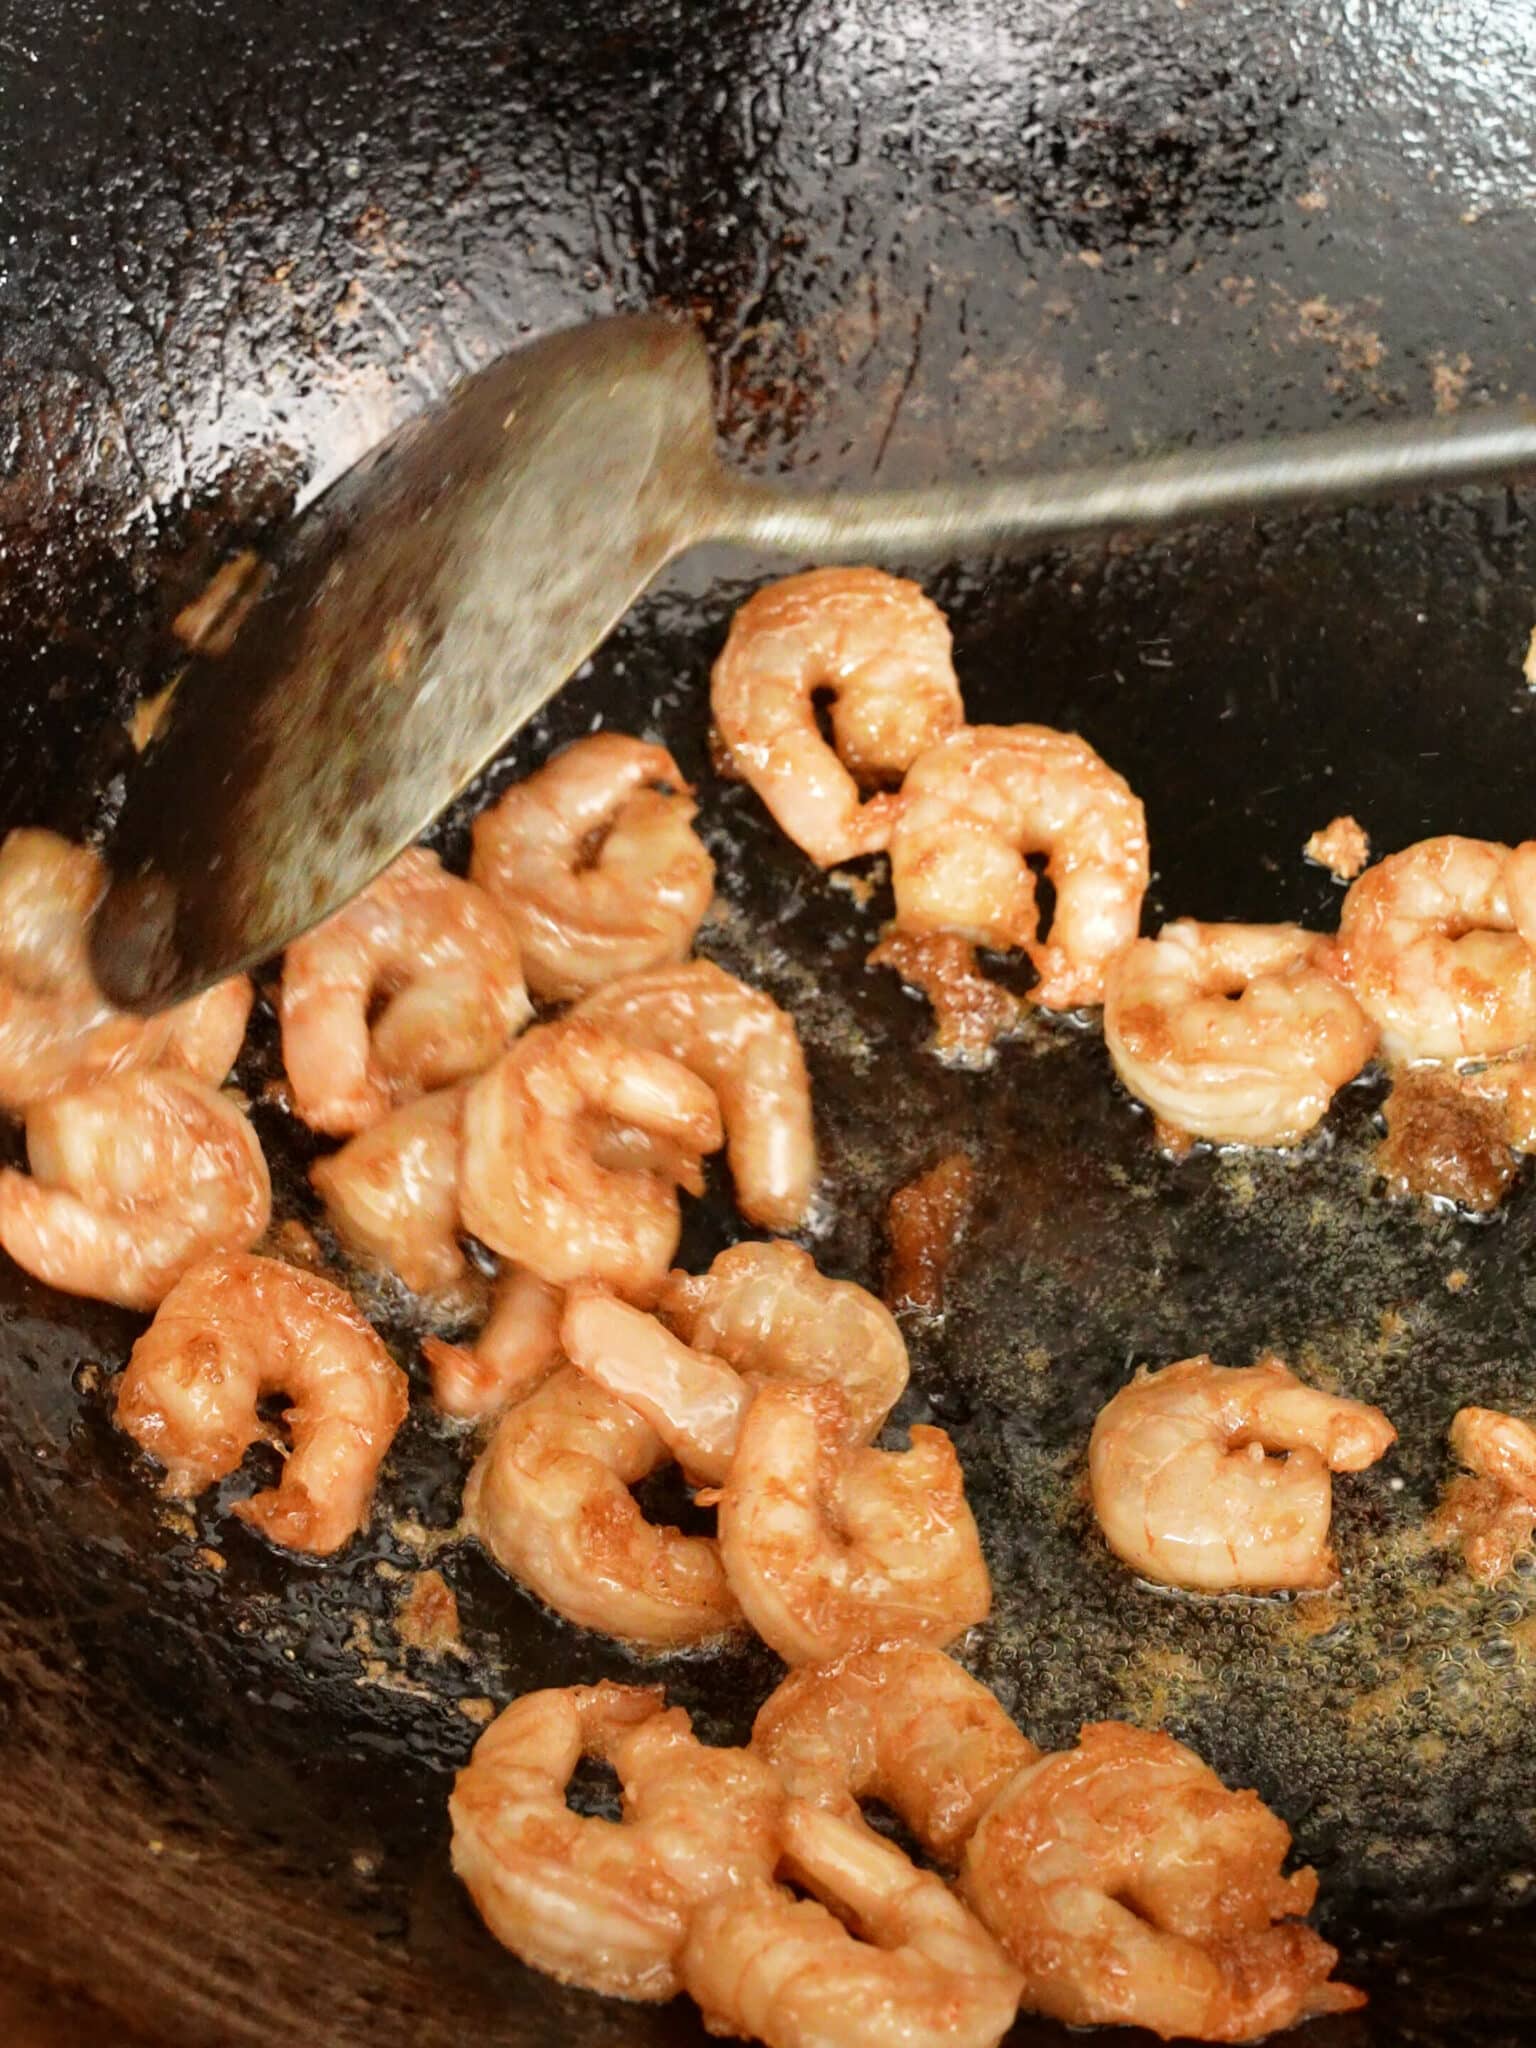 Shrimp cooking in a wok.